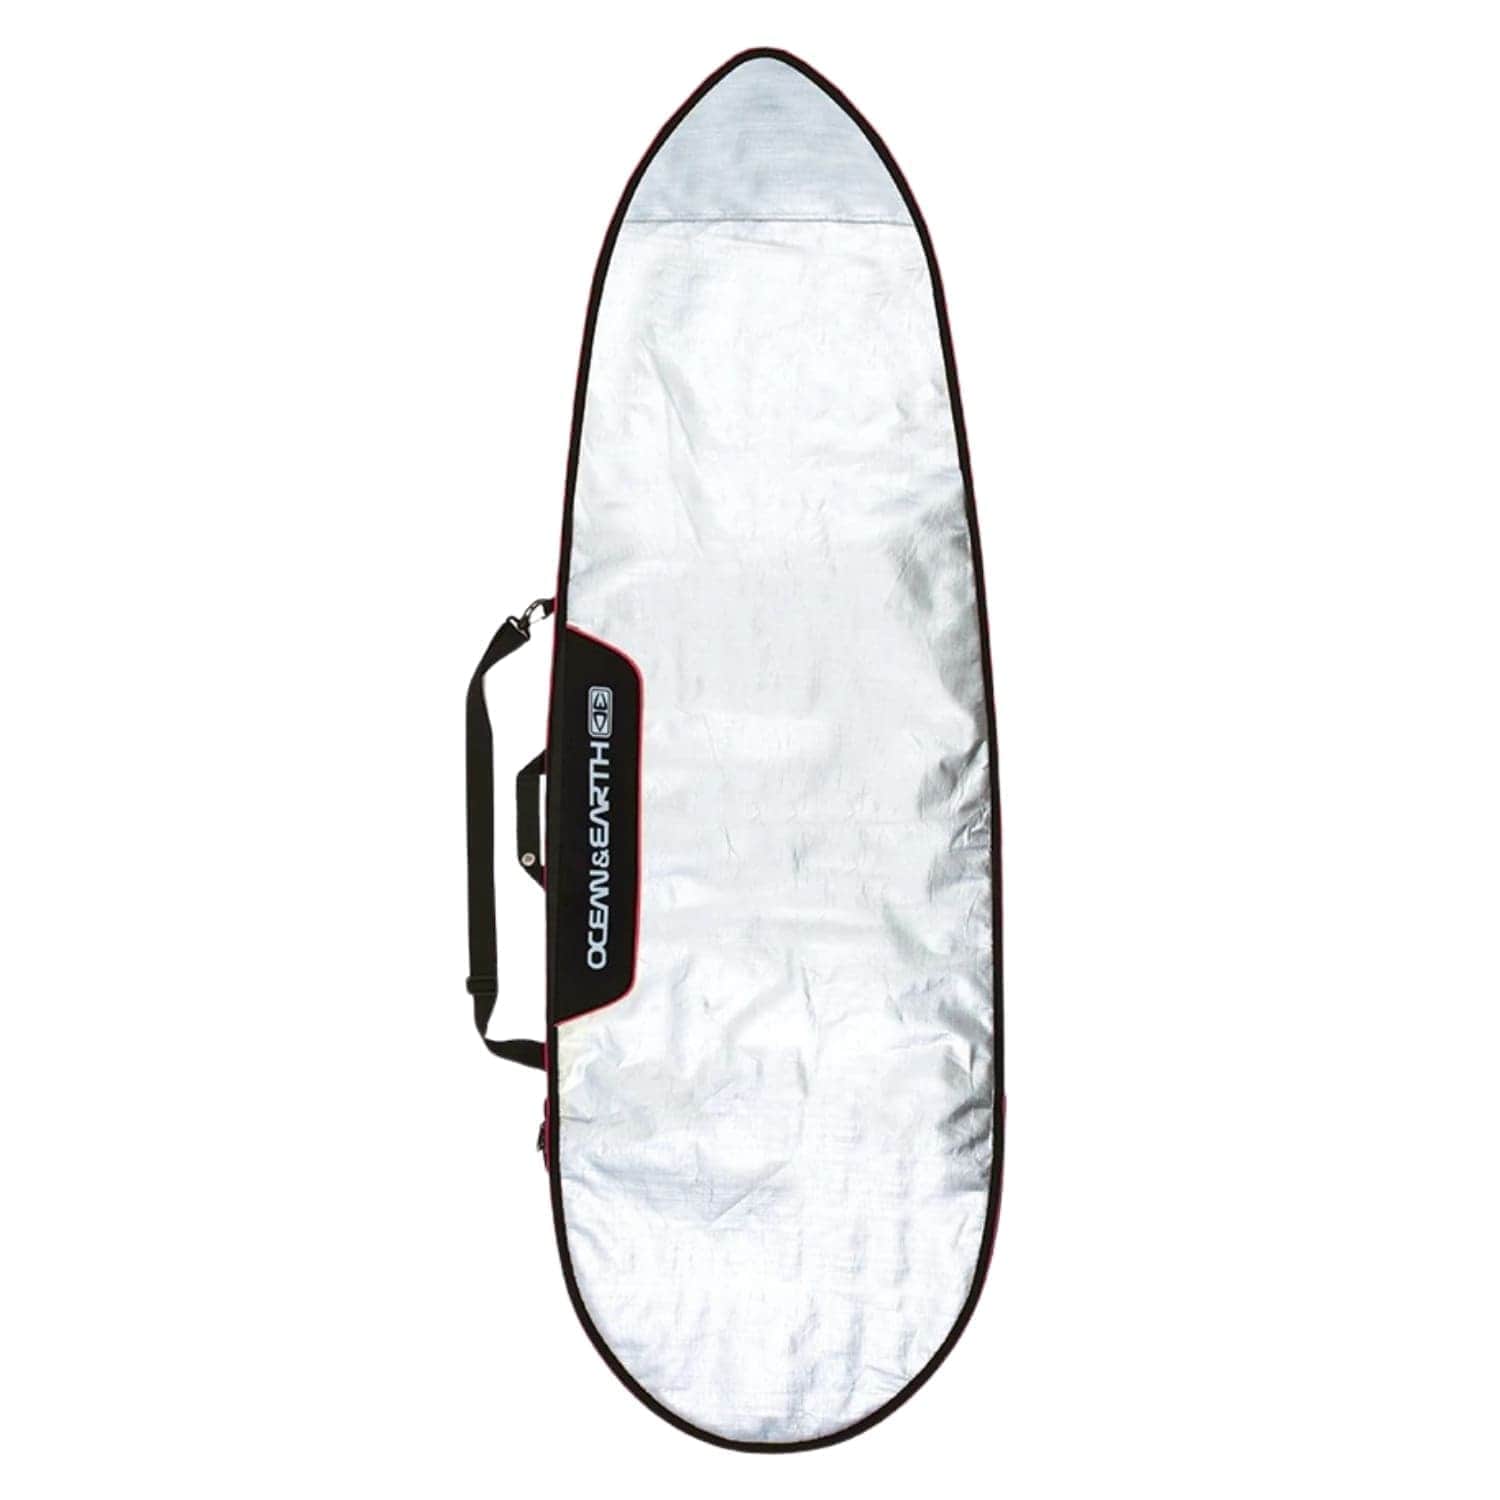 Ocean and Earth Barry Basic 7ft 6in Fish/Longboard Surfboard Cover 2021 - Silver/Red - Surfboard Day Runner Bag/Cover by Ocean and Earth 7ft 6in